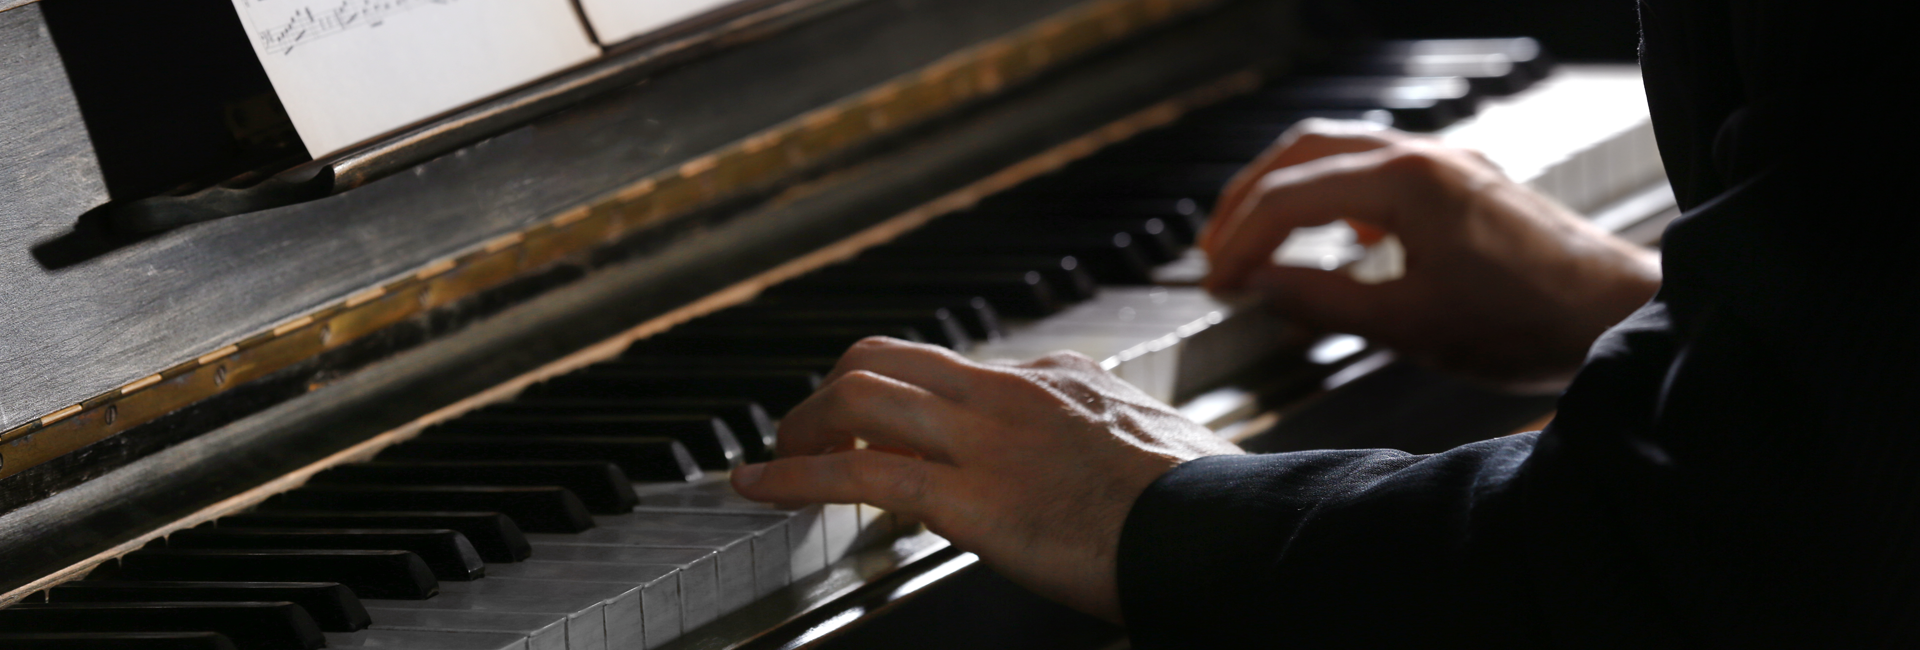 Close up of Man Hands Piano Playing